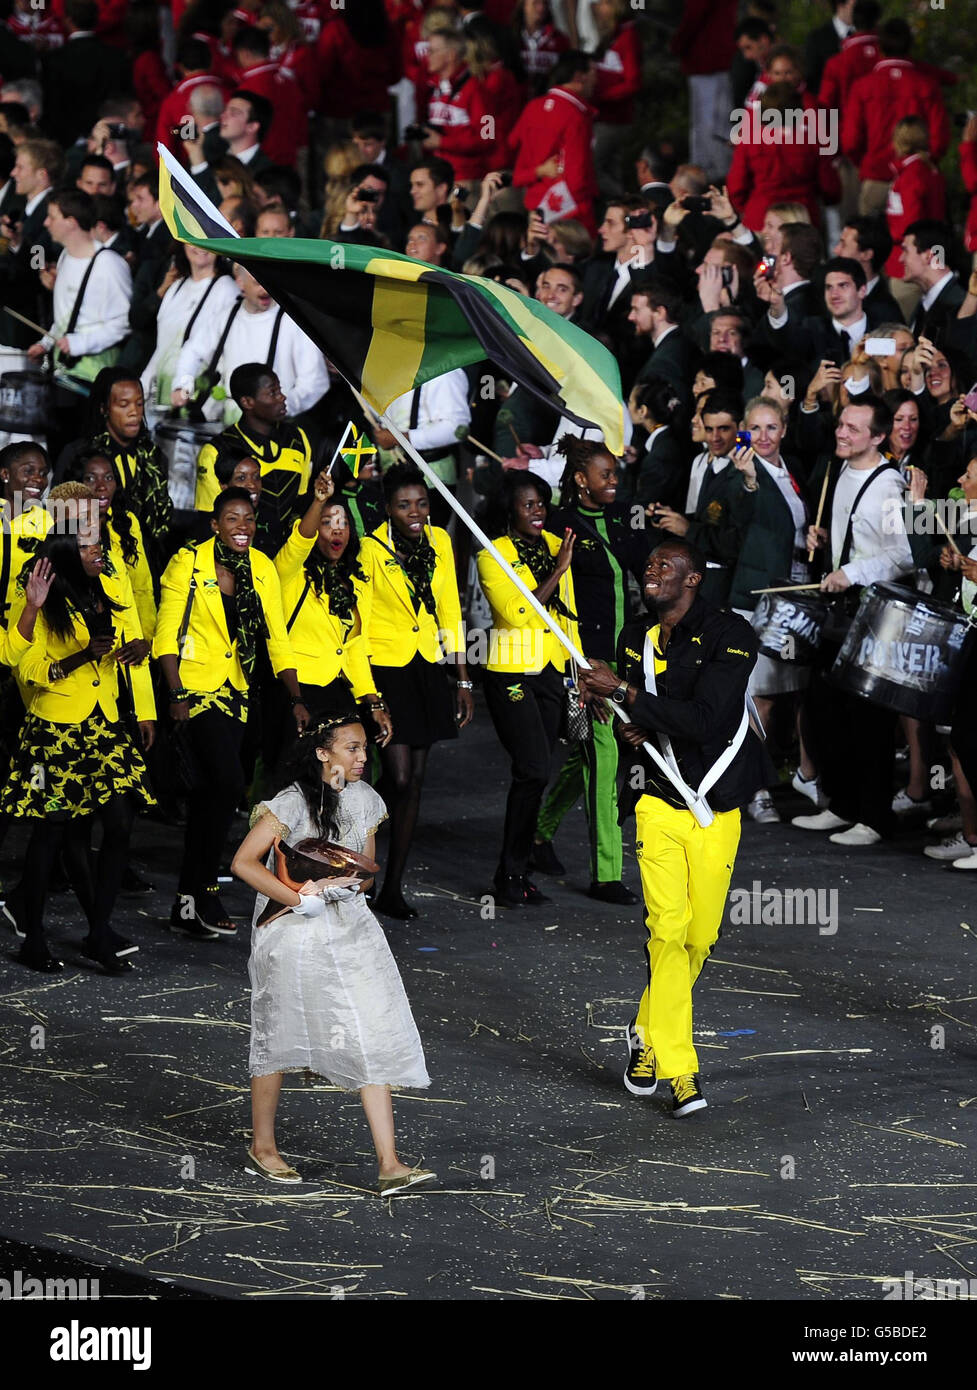 Jamaica's Usain Bolt carries their flag during the Olympic Games 2012 Opening Ceremony at the Olympic Stadium, London. Stock Photo